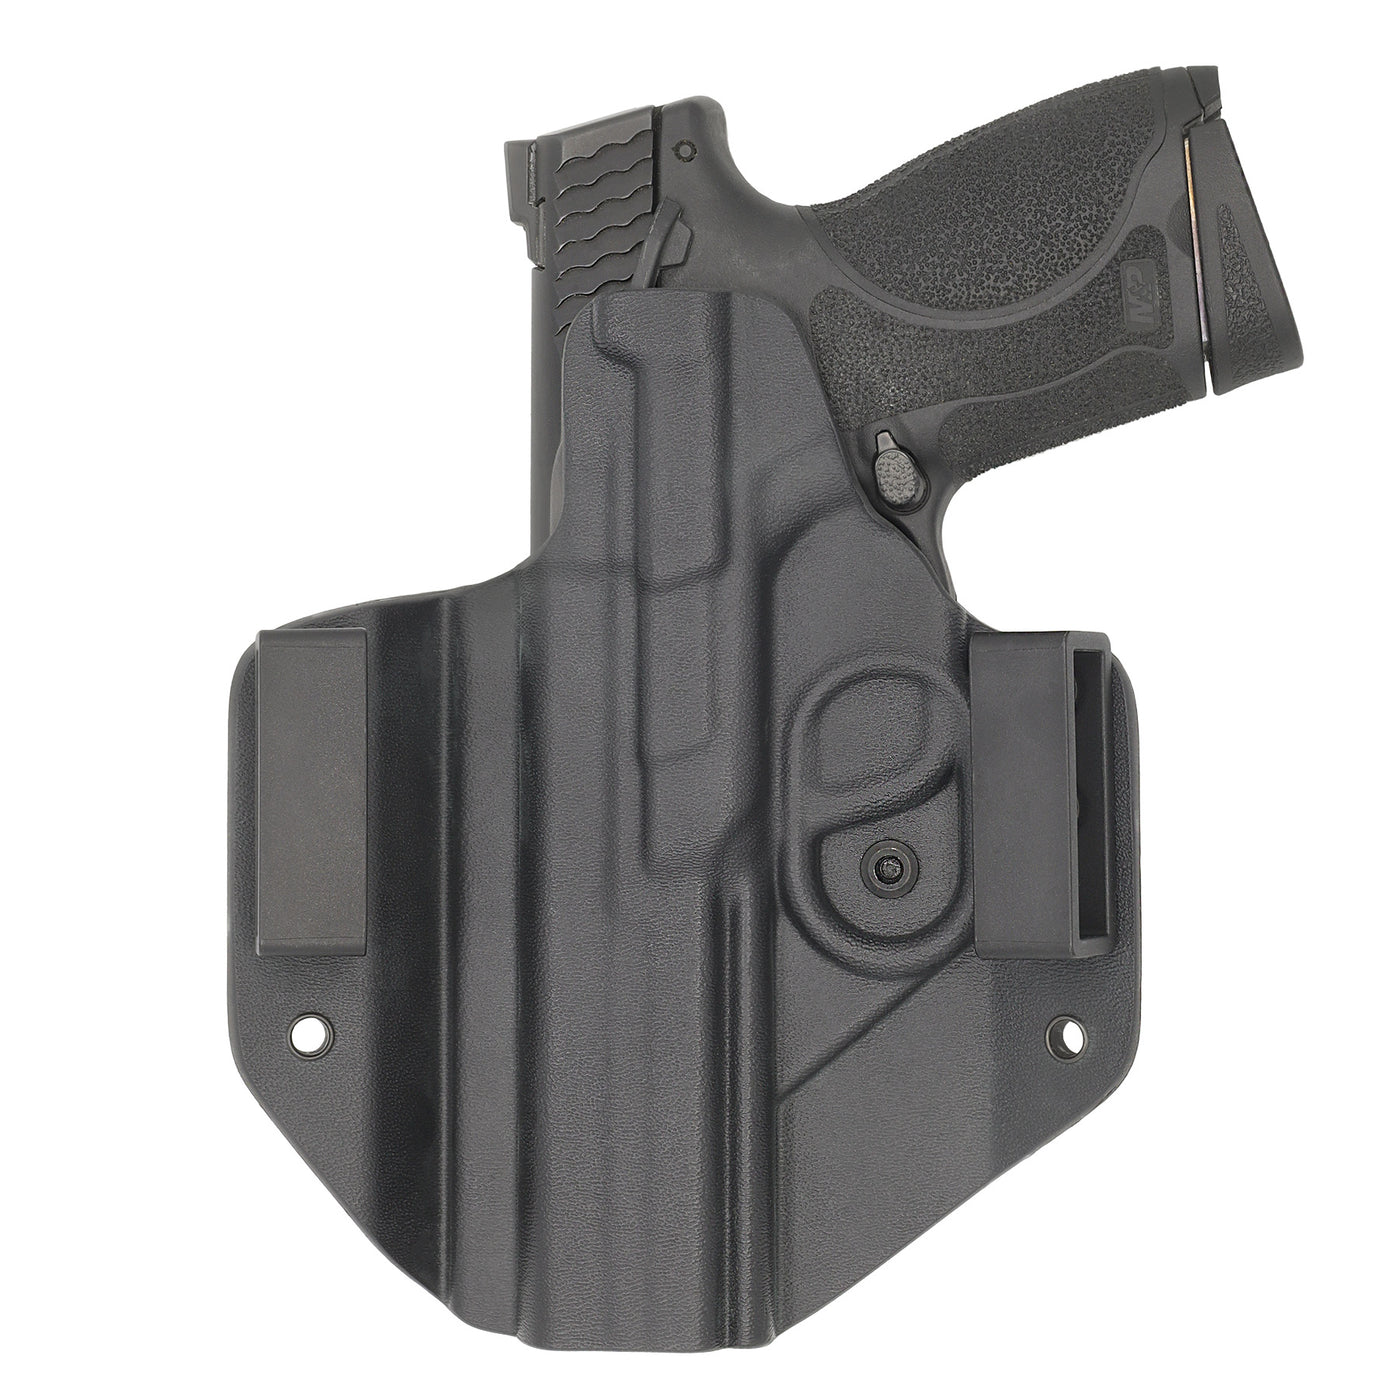 C&G Holsters quickship OWB Covert S&W M&P .45cal 5" in holstered position back view